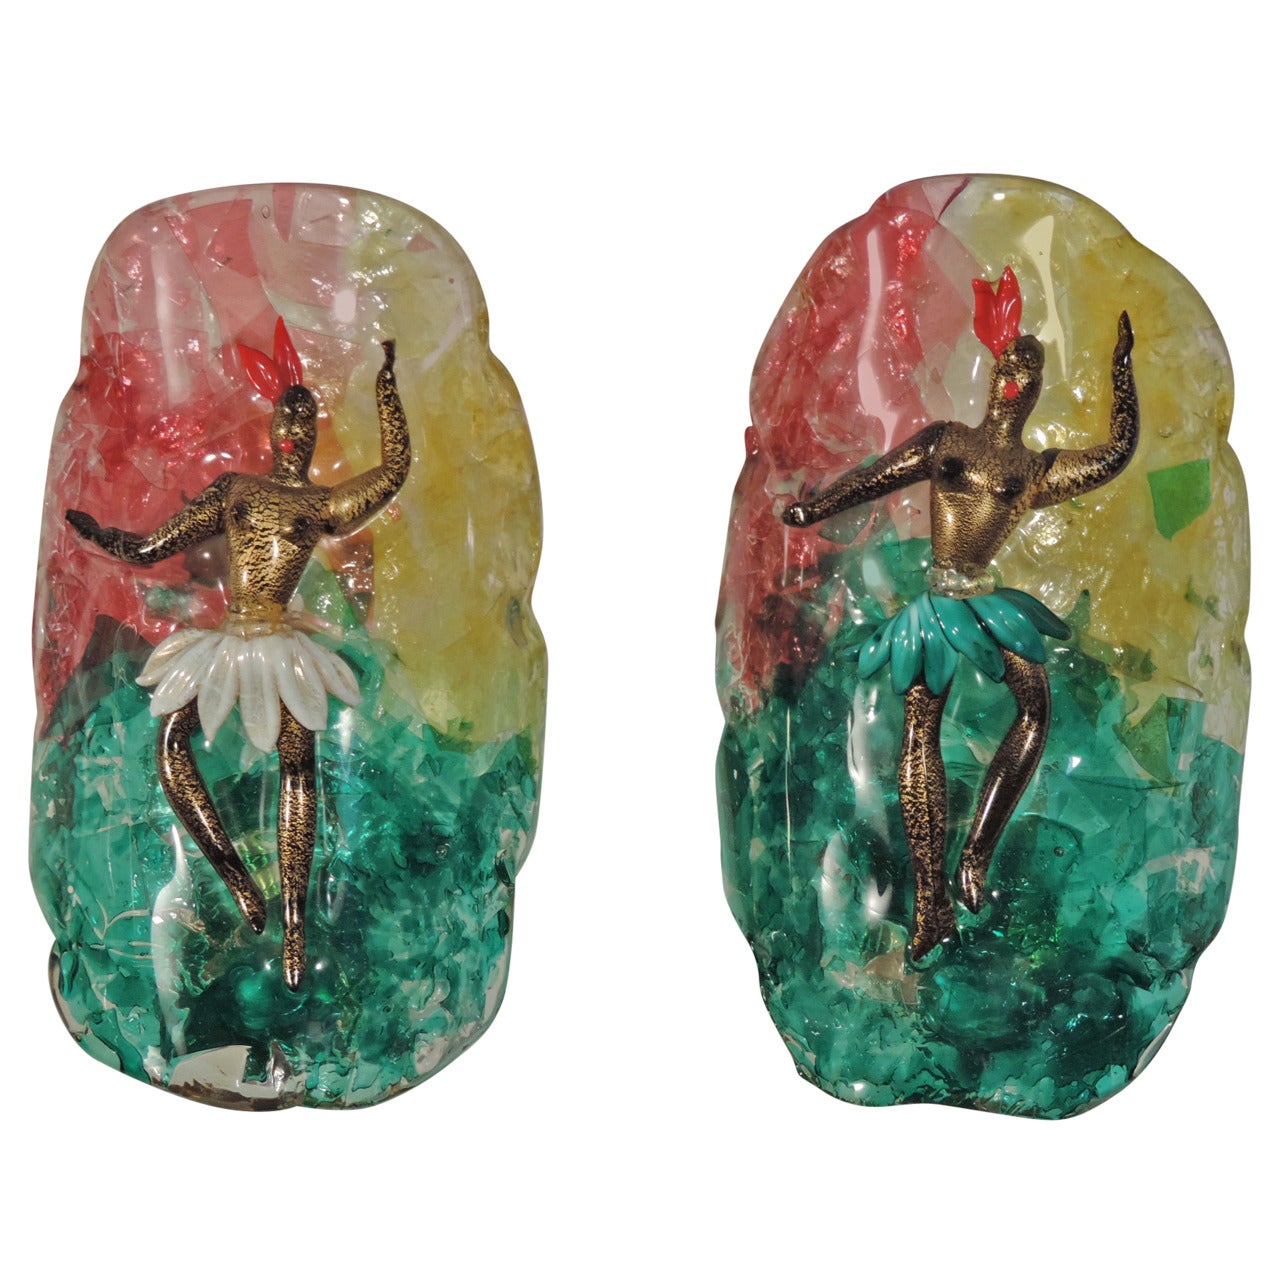 Cenedese Murano Glass Sconces Depicting Dancers, Italy 1940s For Sale